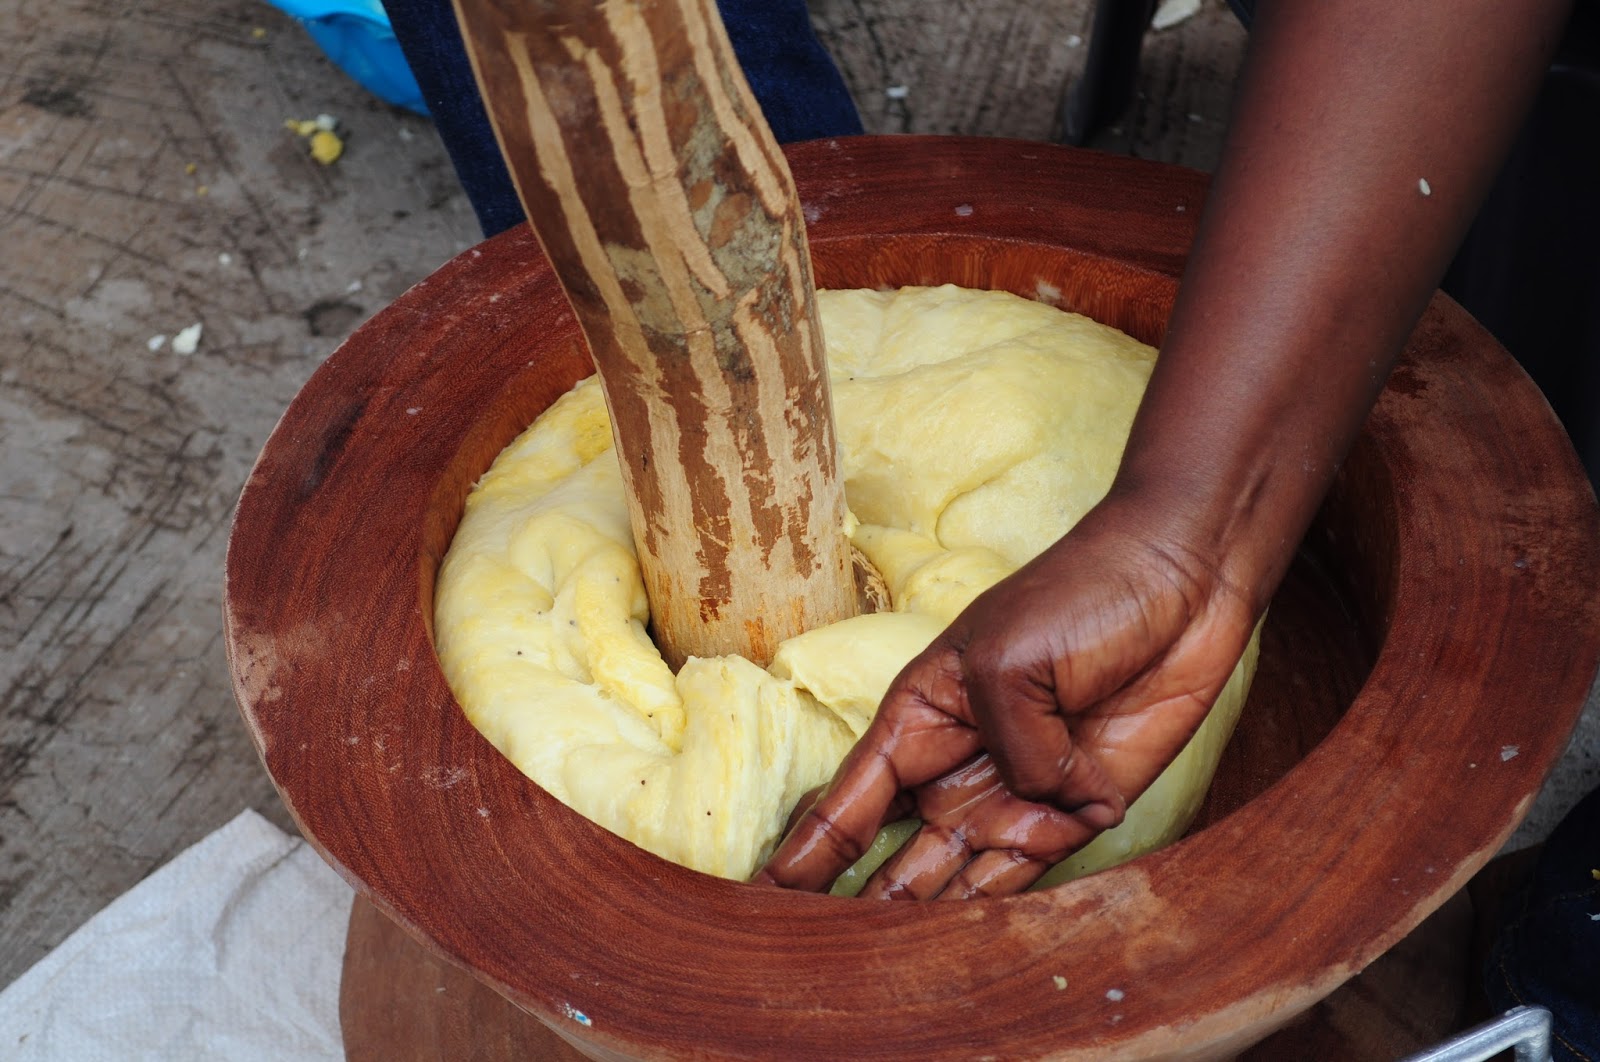 Teachers apologize for pounding fufu during teaching hours